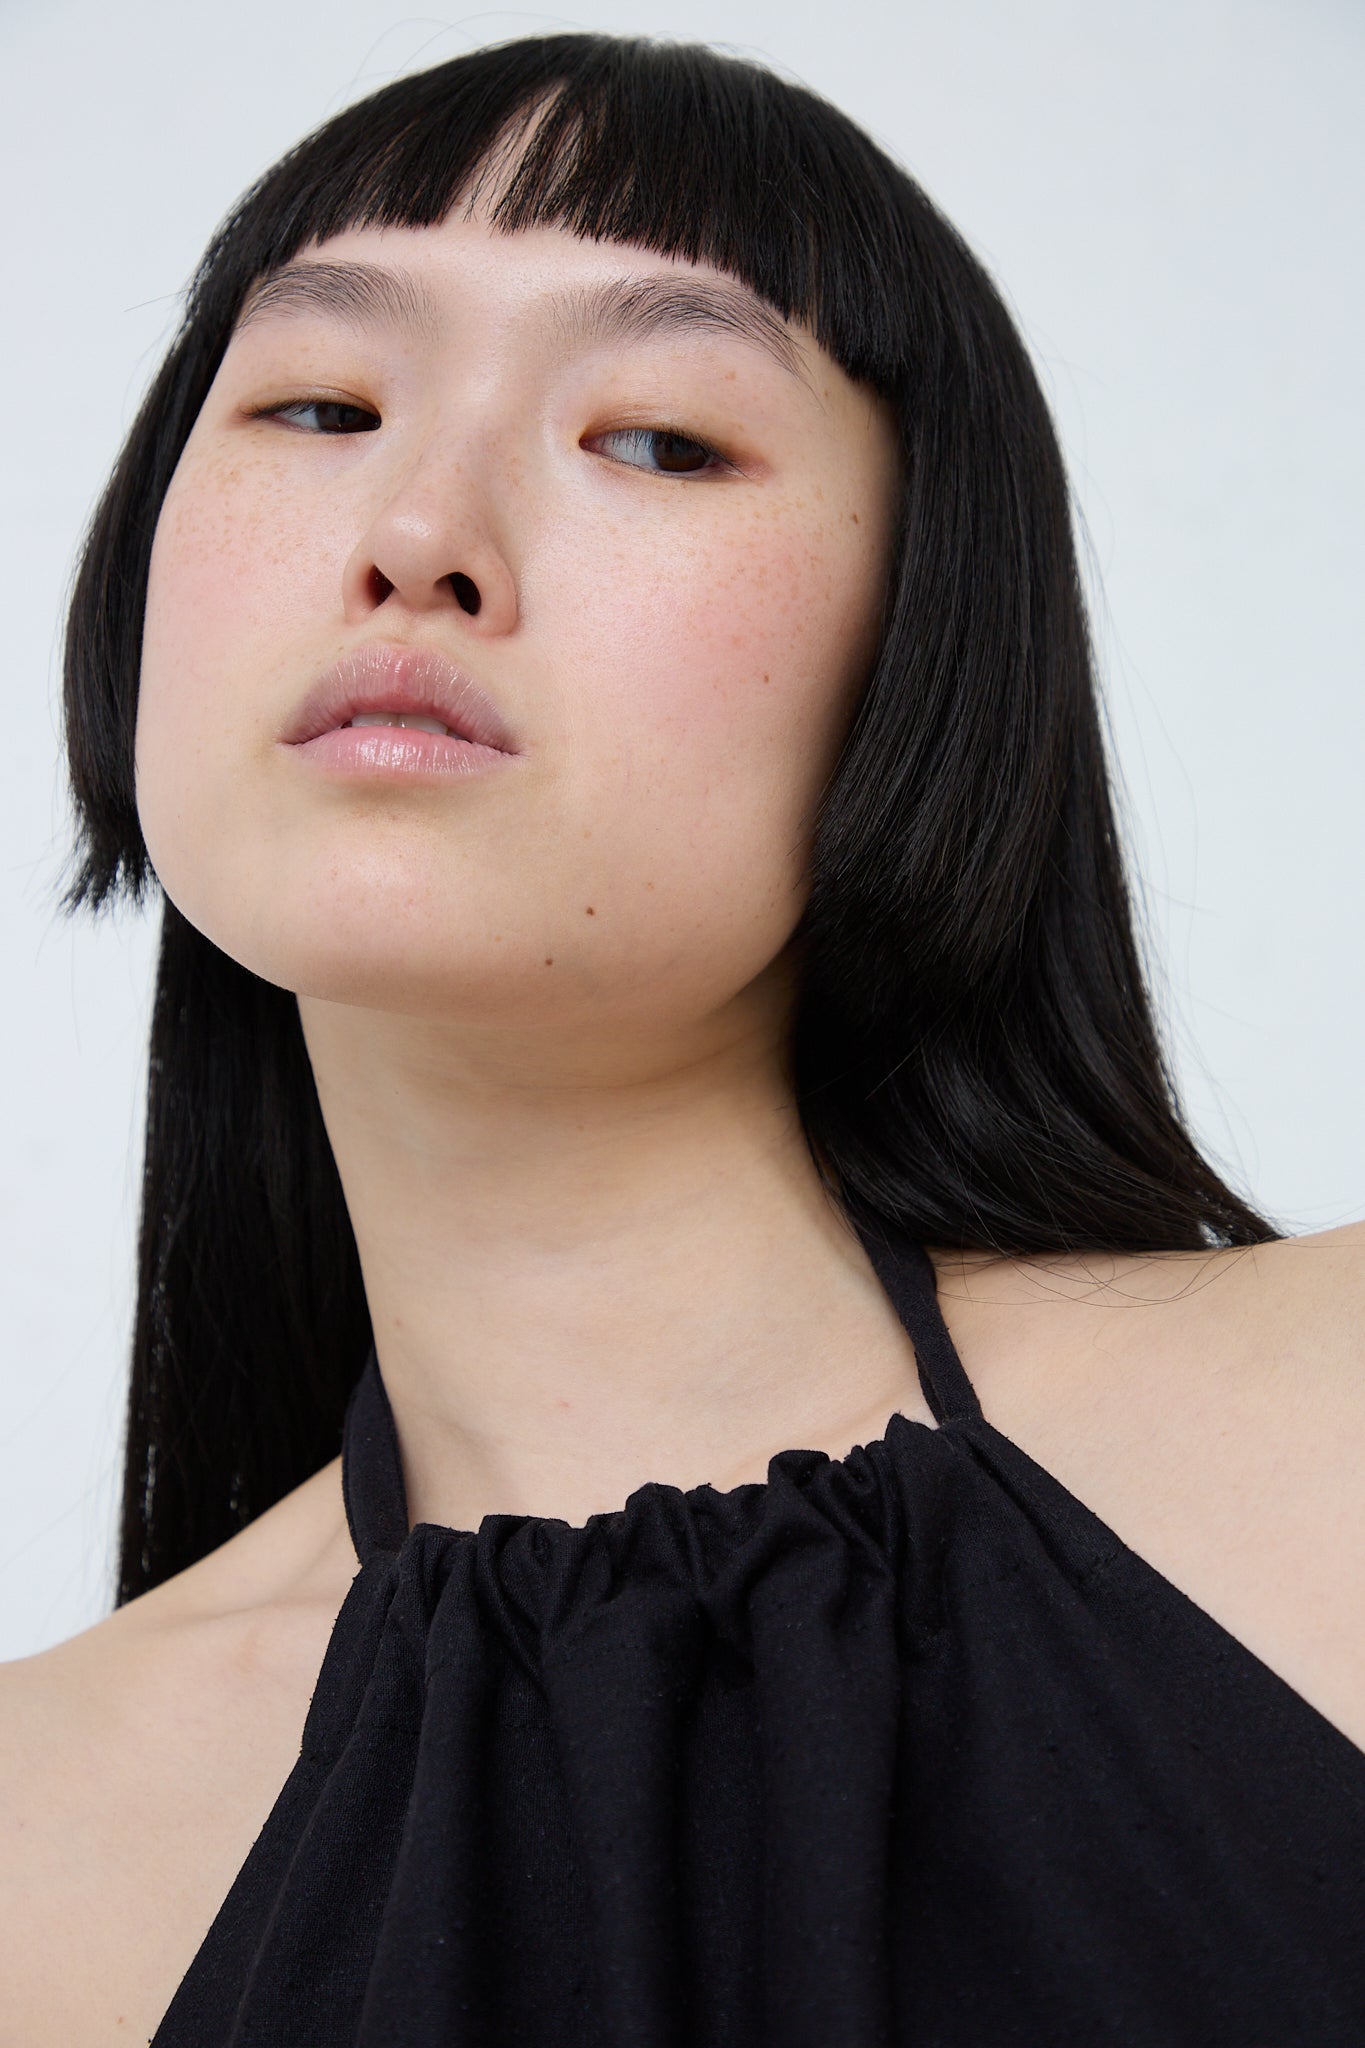 A sustainably produced Wild Silk Trope Apron Dress in Black by Baserange, with bangs and a black top made of black wild silk. Front view and up close of collar details.